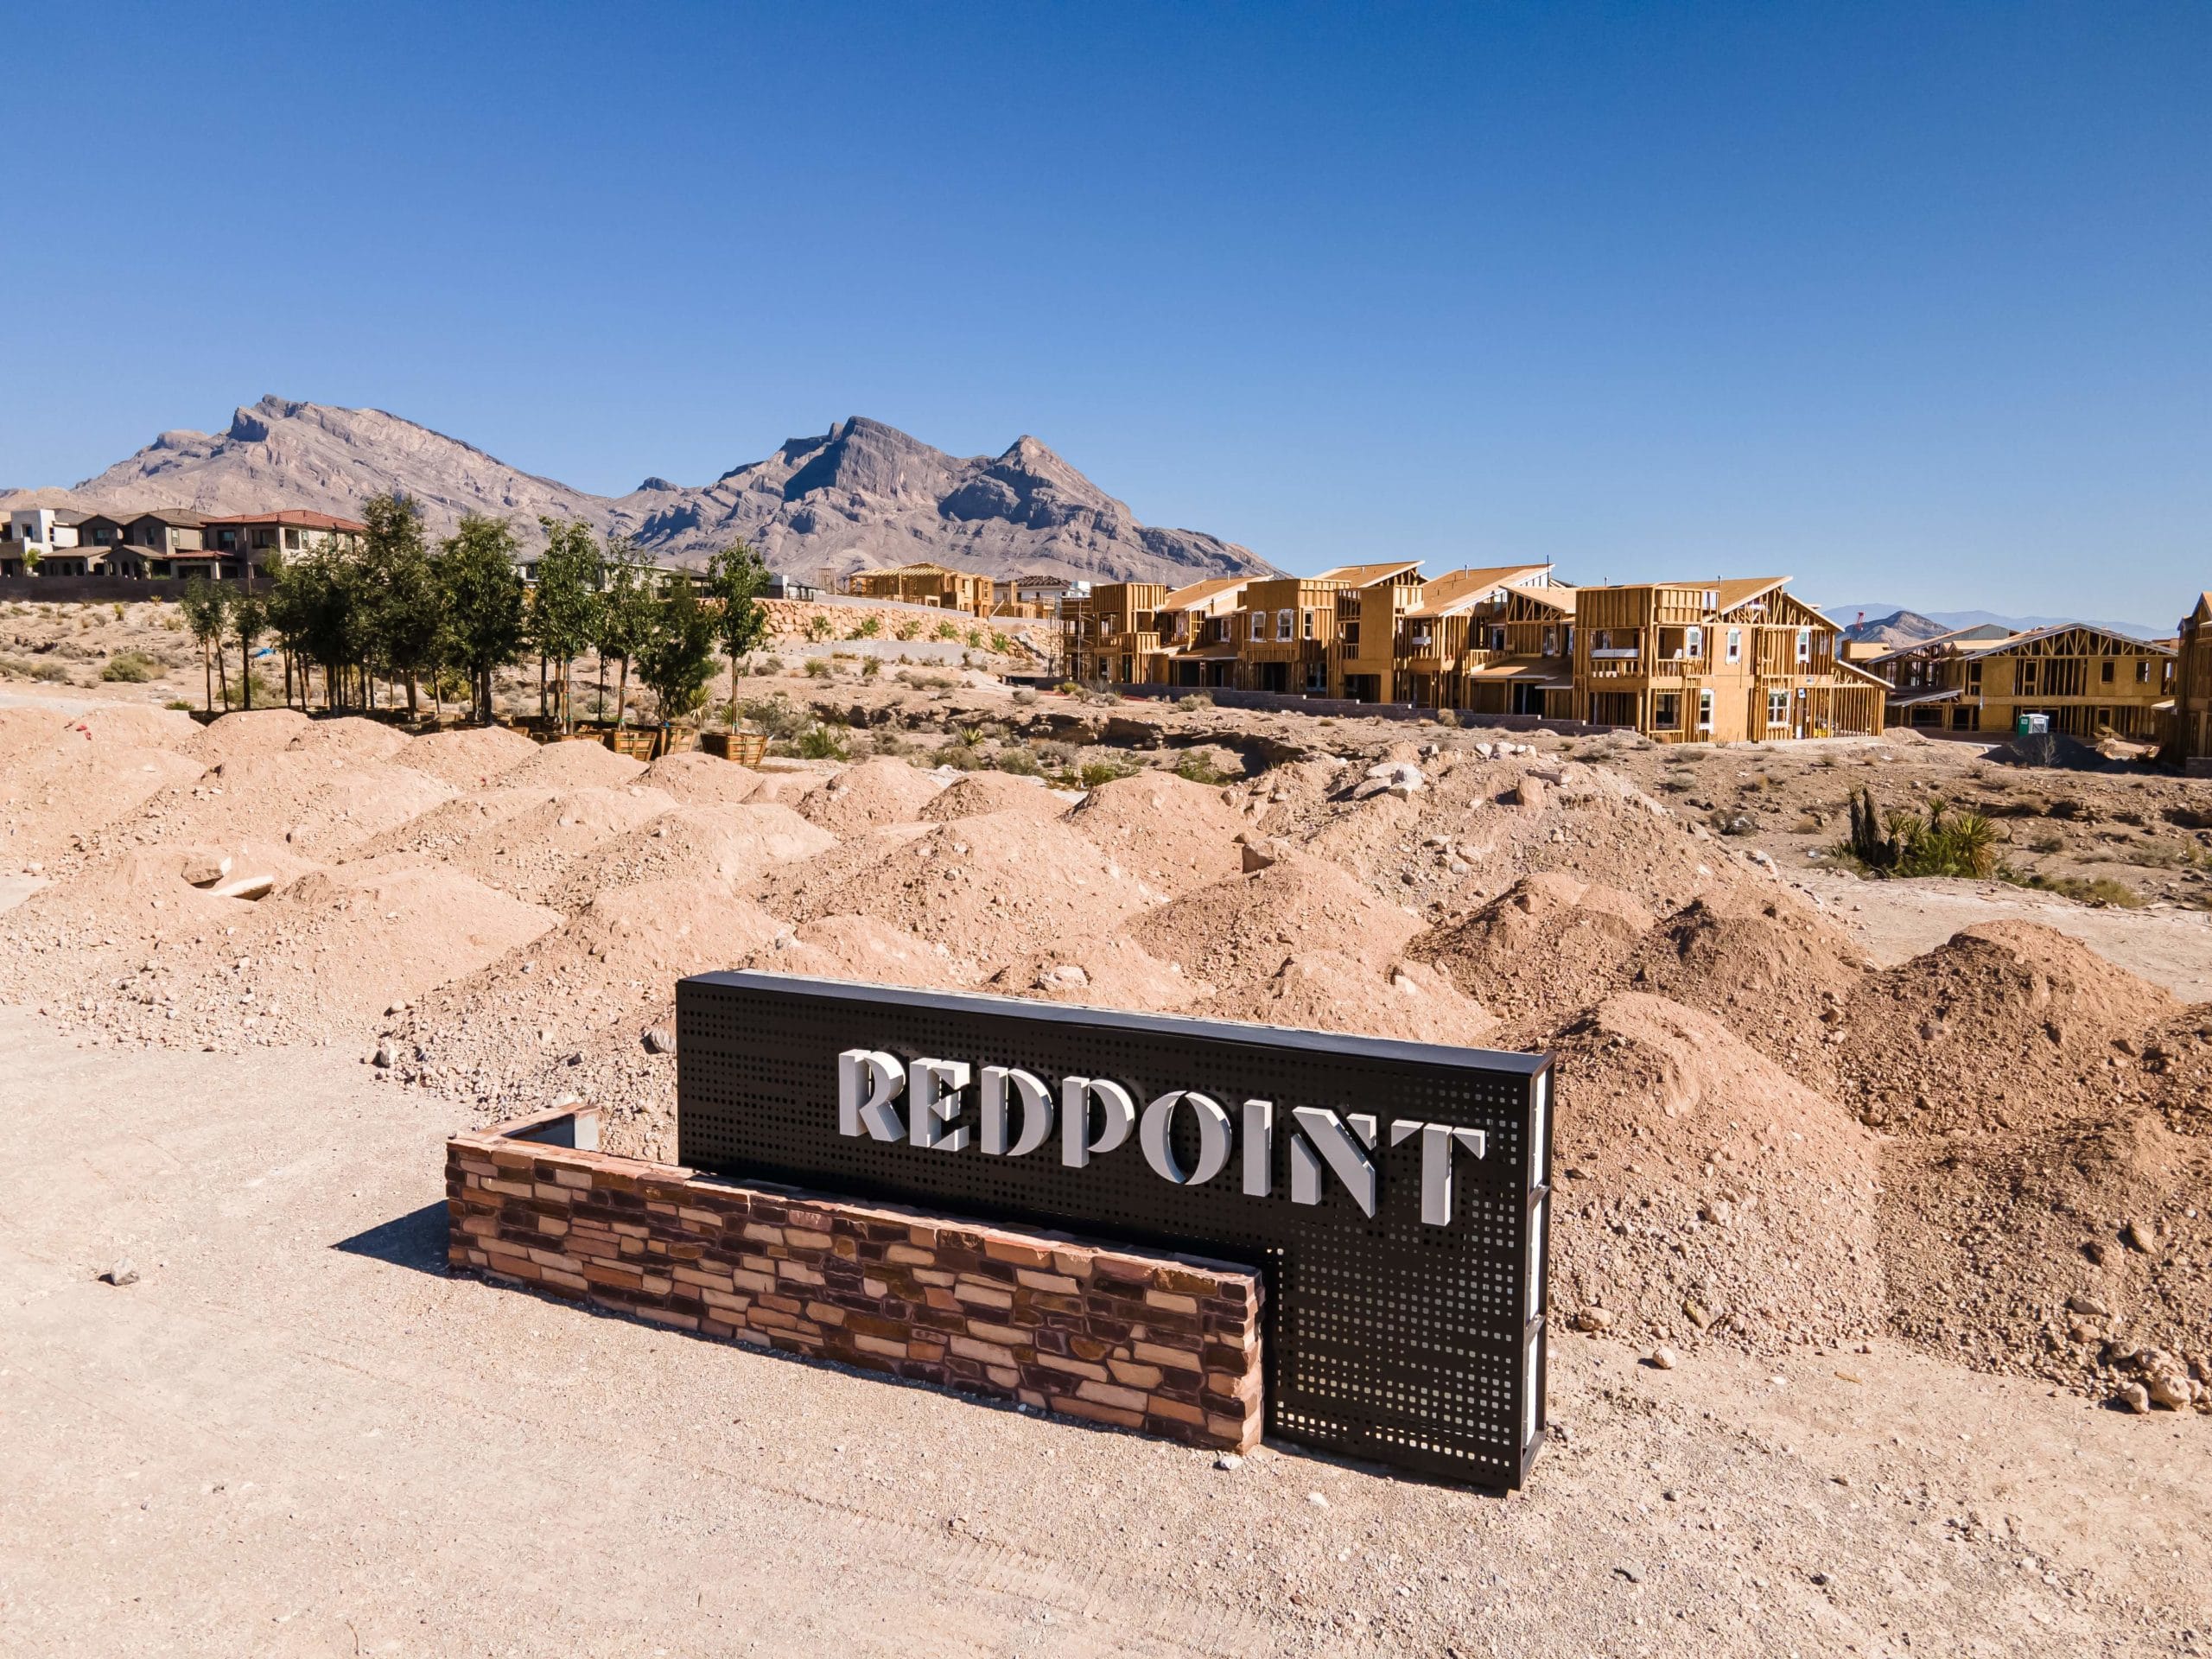 Redpoint Monument Sign in Summerlin